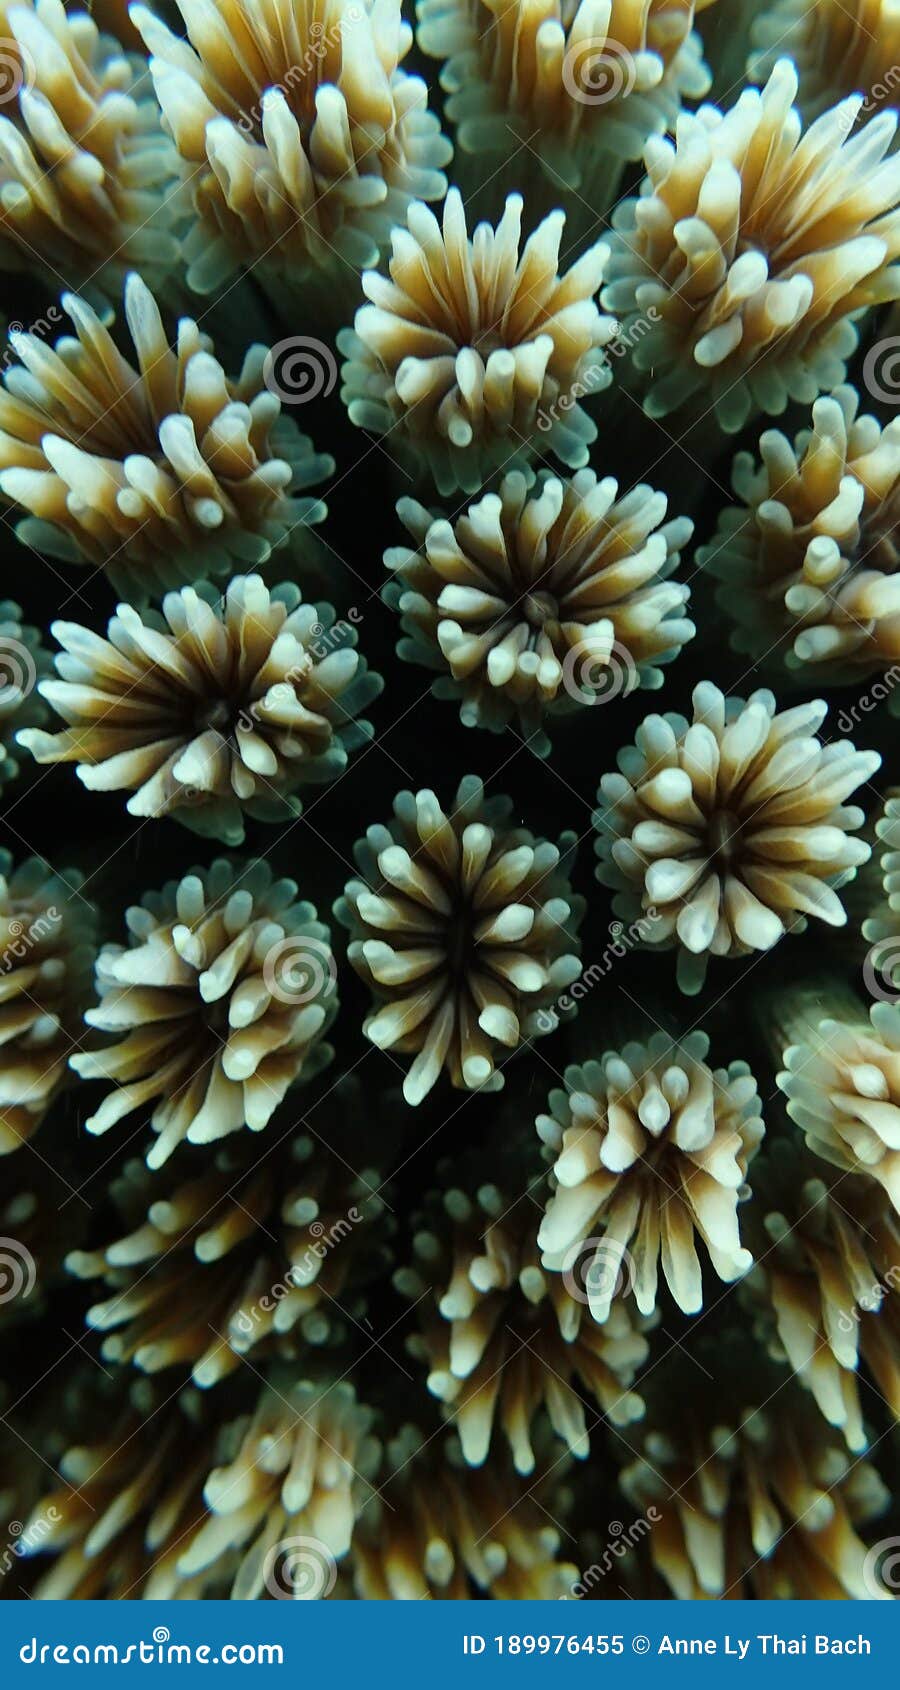 galaxea close view of coral polyps of scleractinian hard coral, wall corallites separated